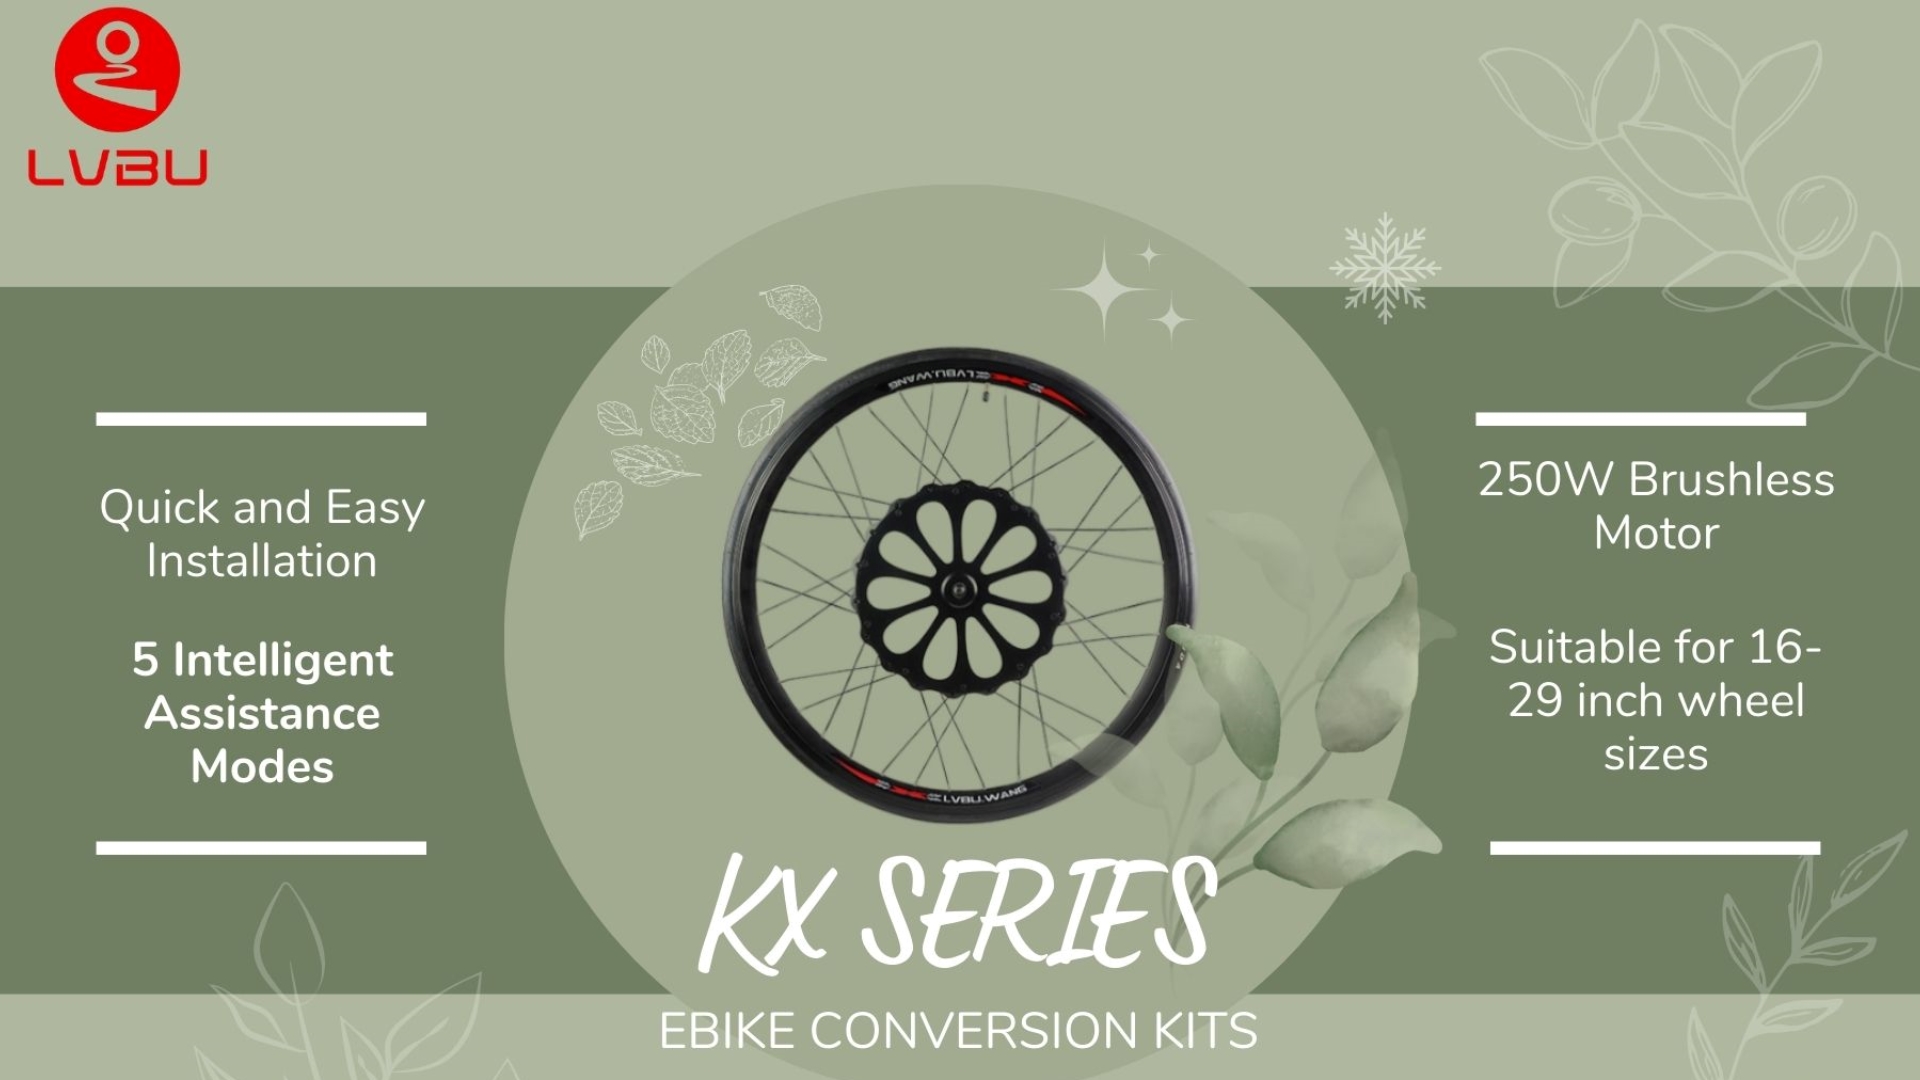 Protect Your Knees and Ride Smarter with LVBU's KX Series E-Bike Conversion Kits